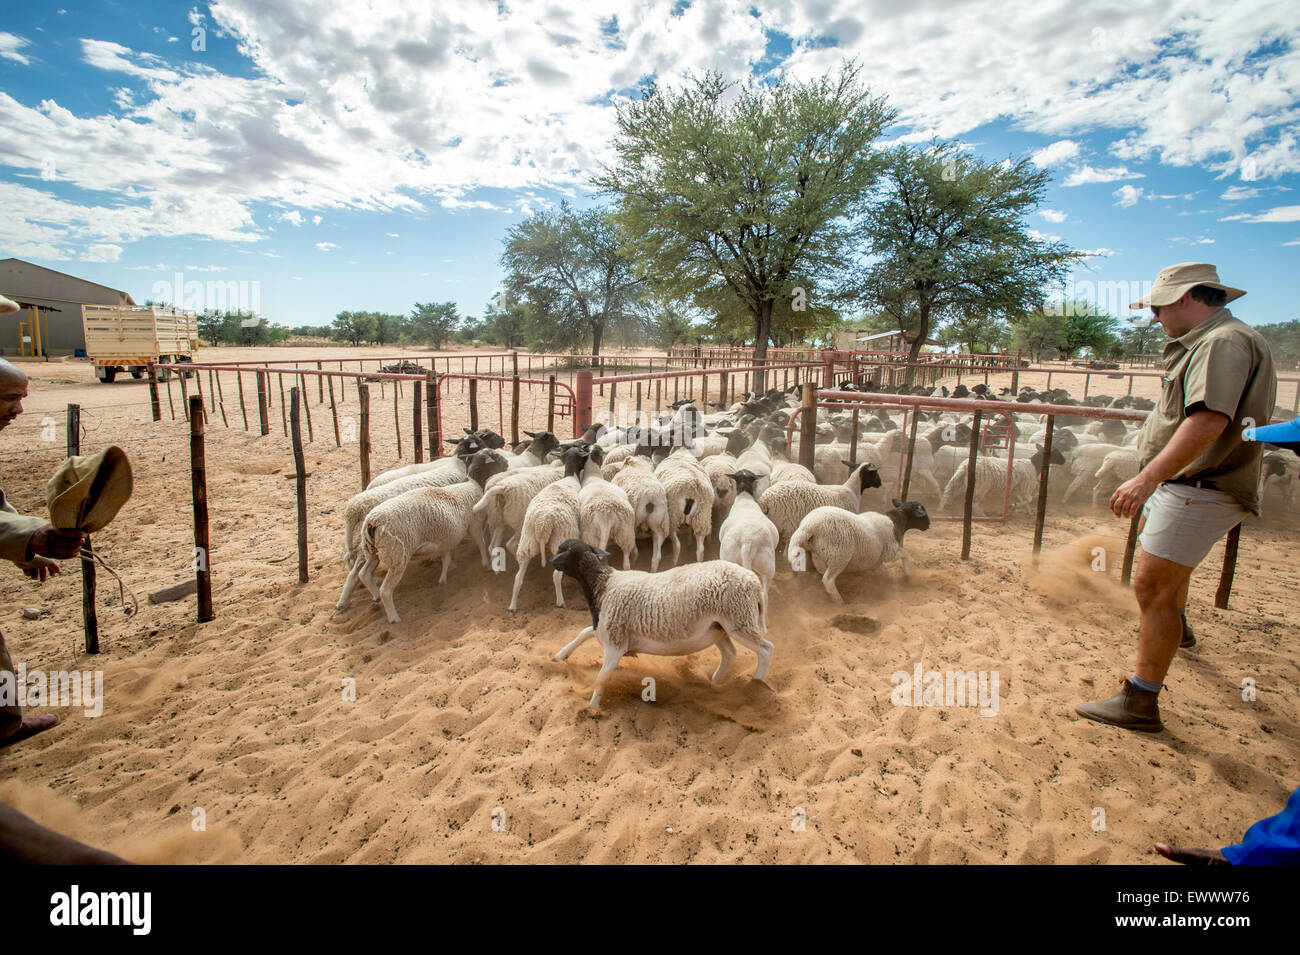 Namibia - Sheep and shepherd in Africa. Stock Photo